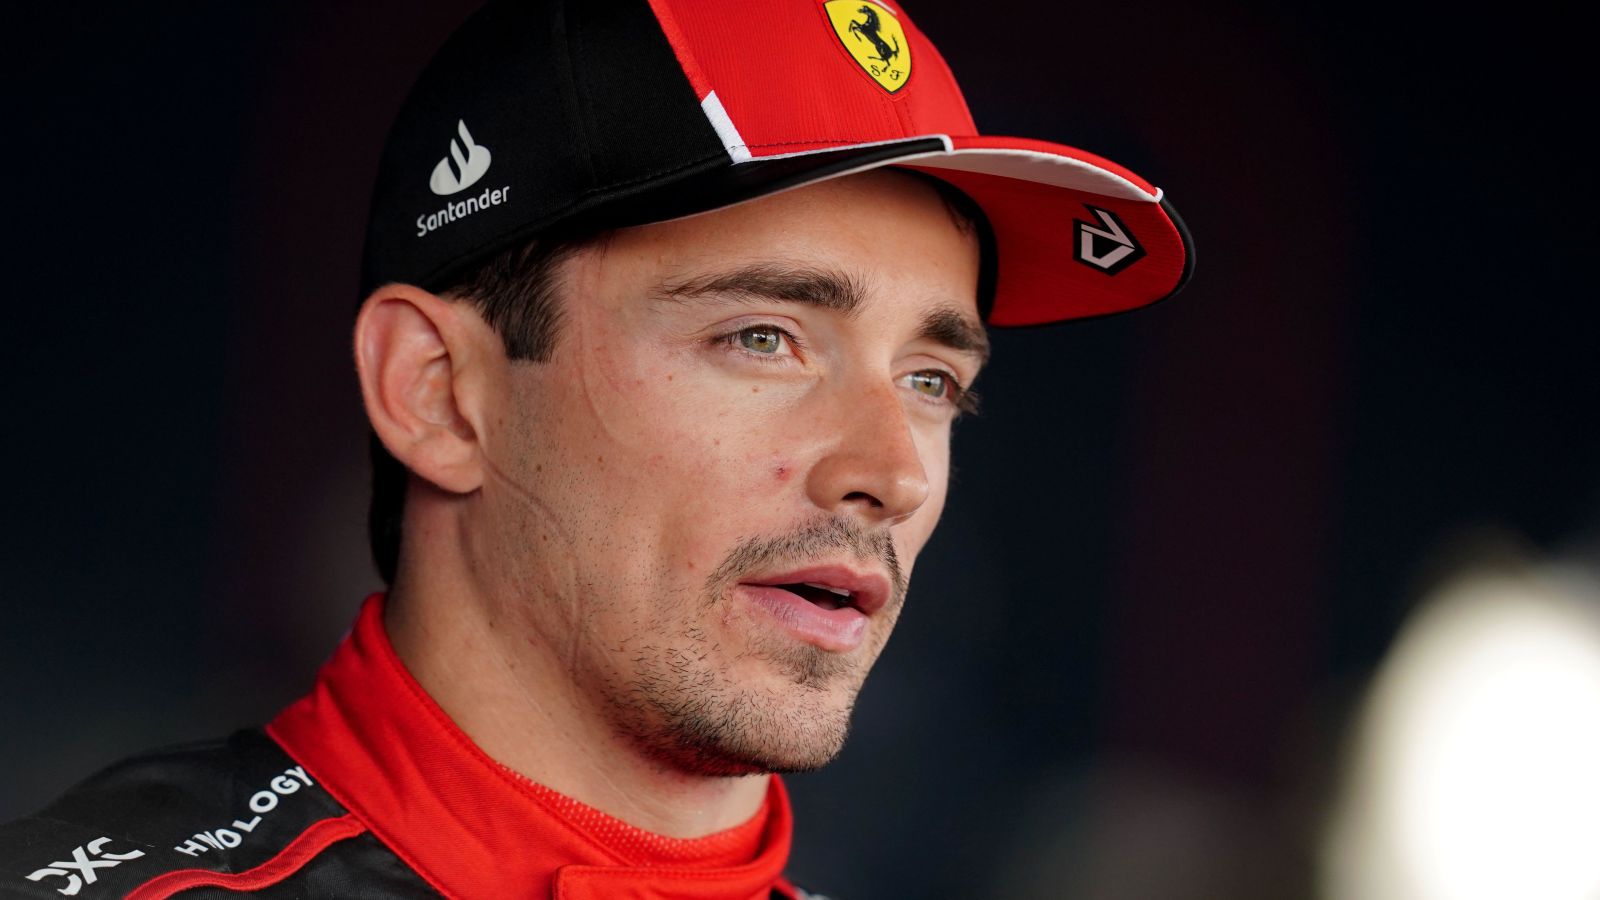 Ferrari driver Charles Leclerc speaks to the media after qualifying at the British Grand Prix. Silverstone, July 2023.